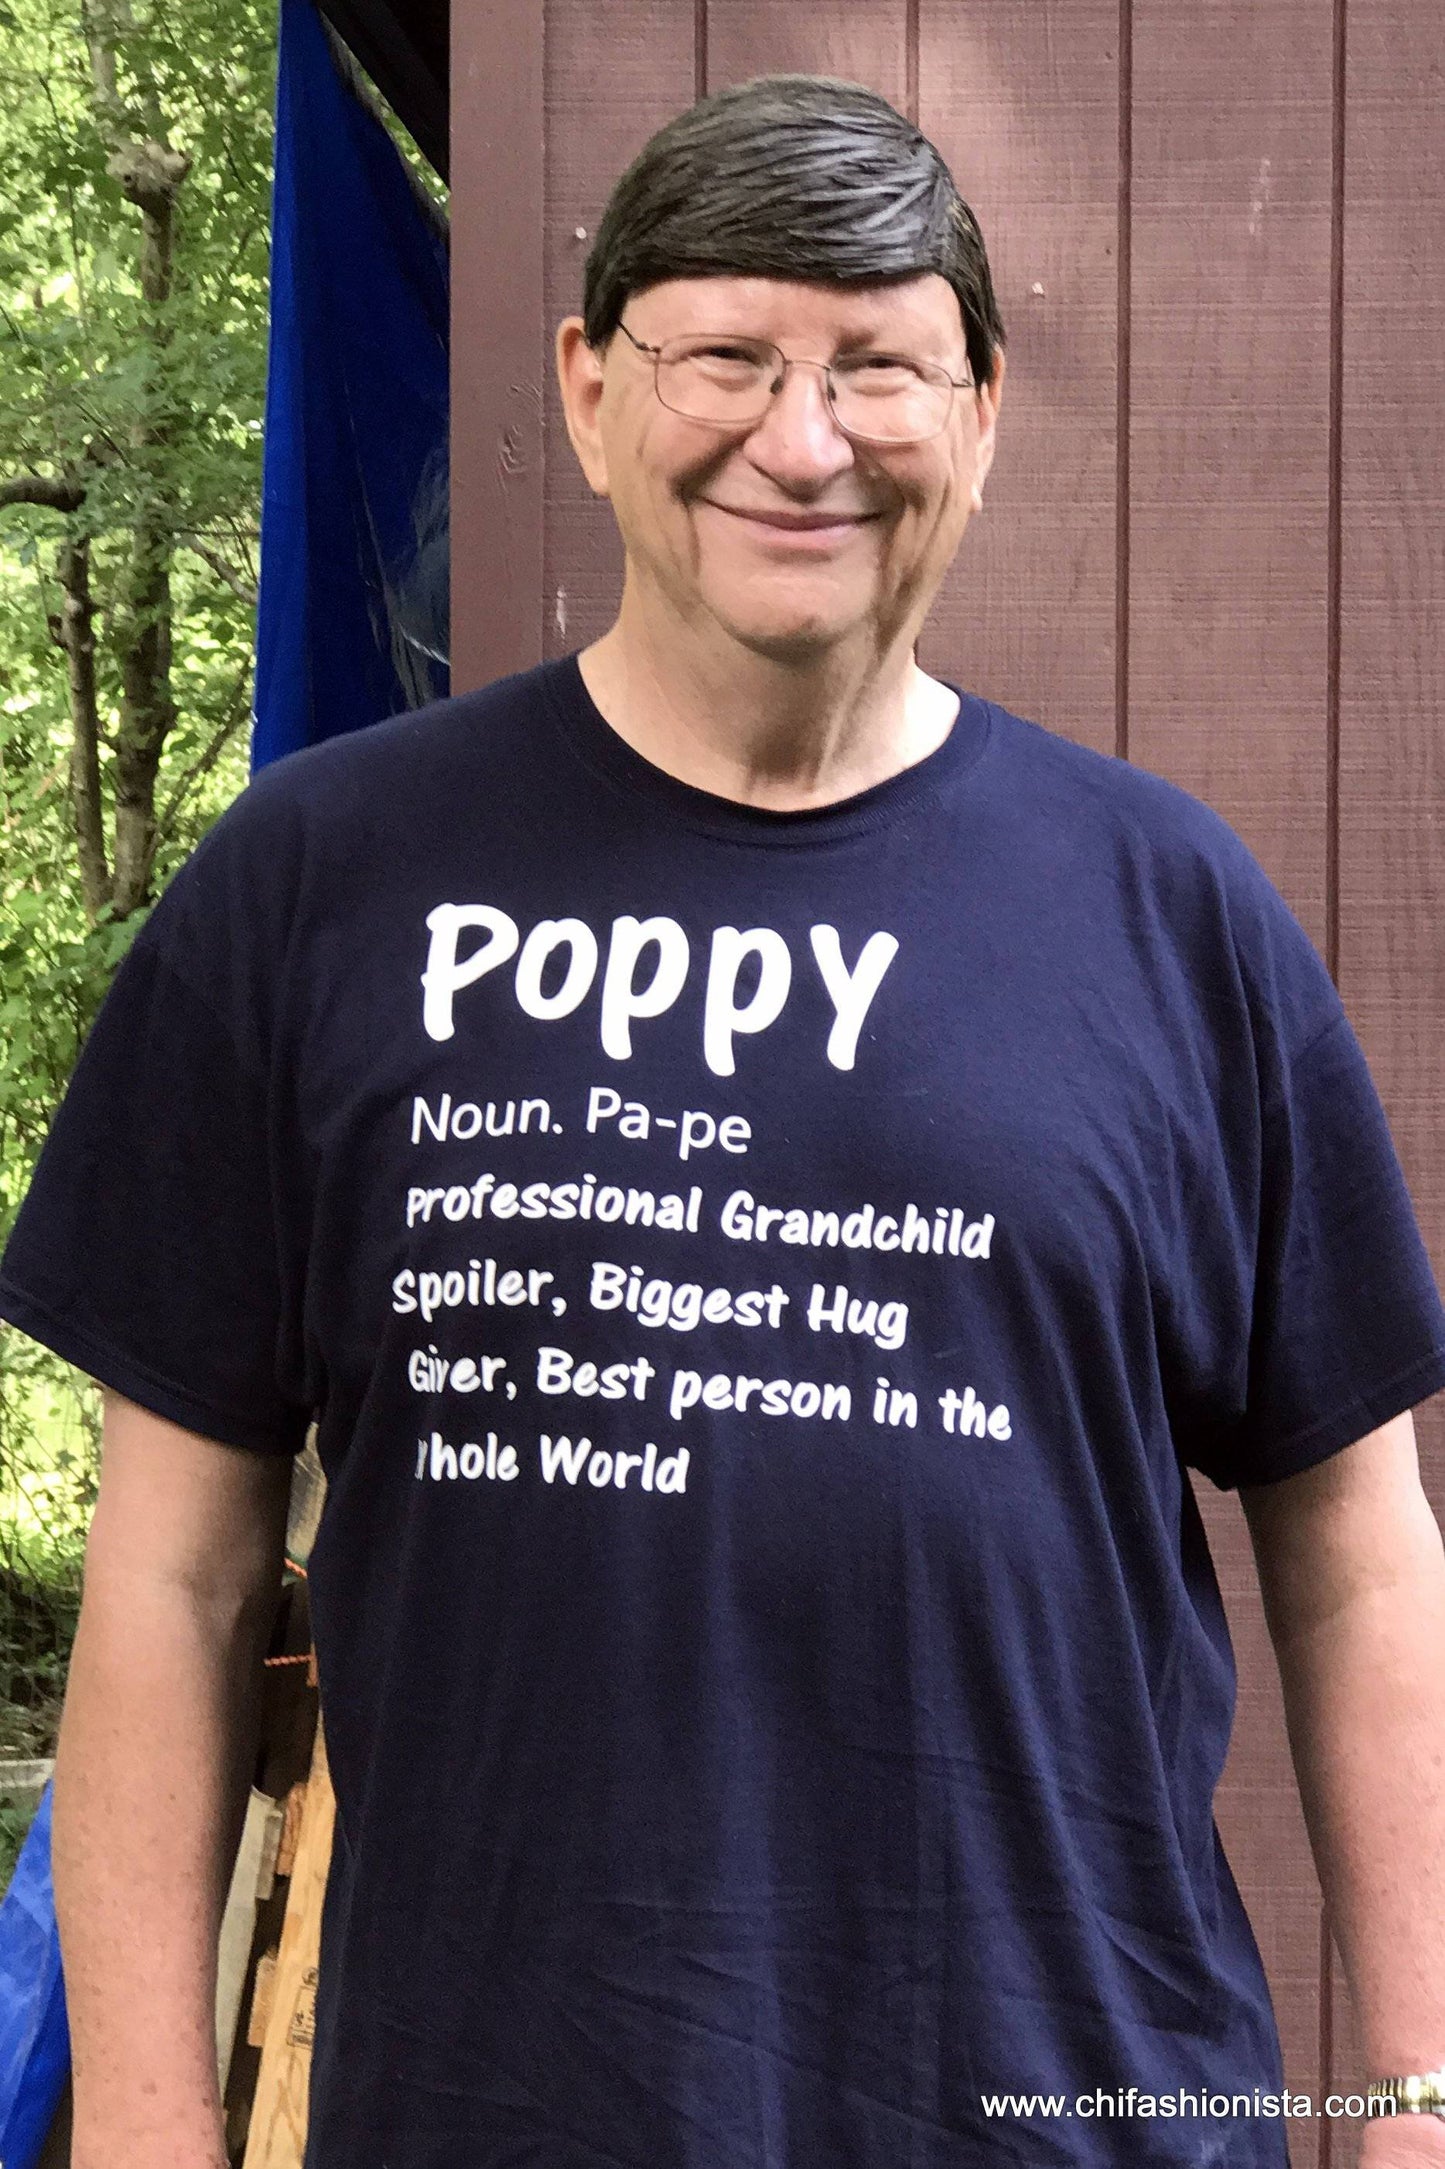 Handcrafted Children's Clothing, Clothing for Children and Parents, Poppy Shirt- Father's Day Shirt, chi-fashionista